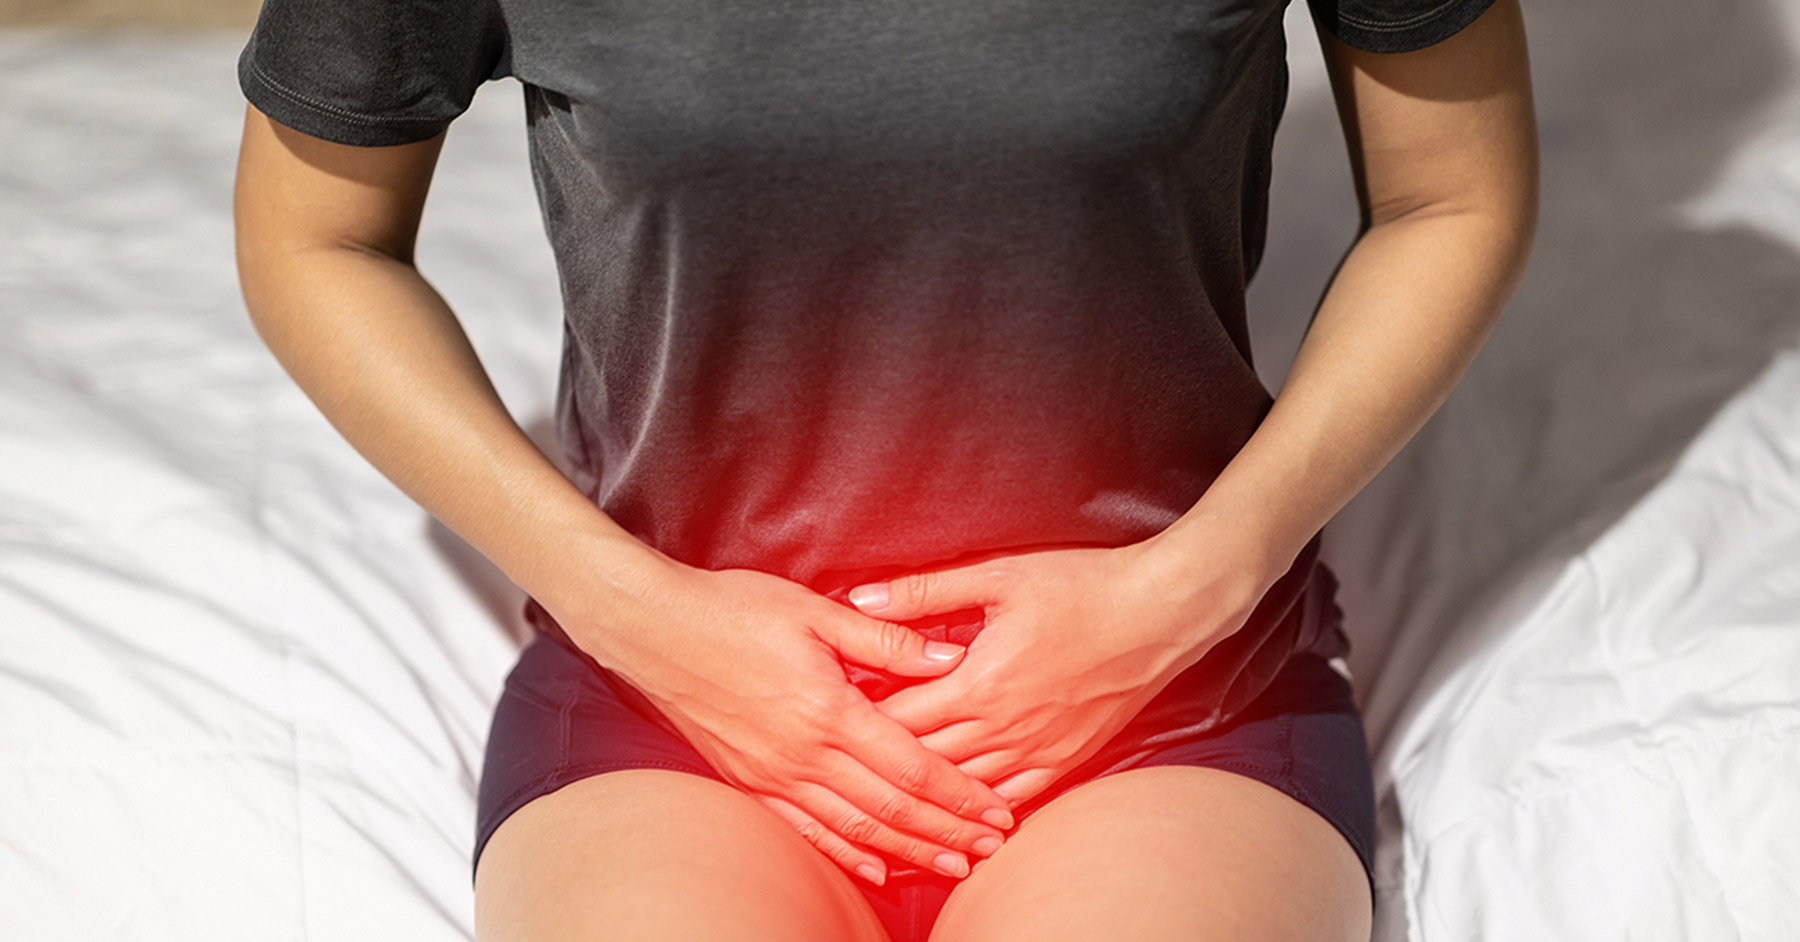 Perineal Pain What It Is and How to Cope in Michigan